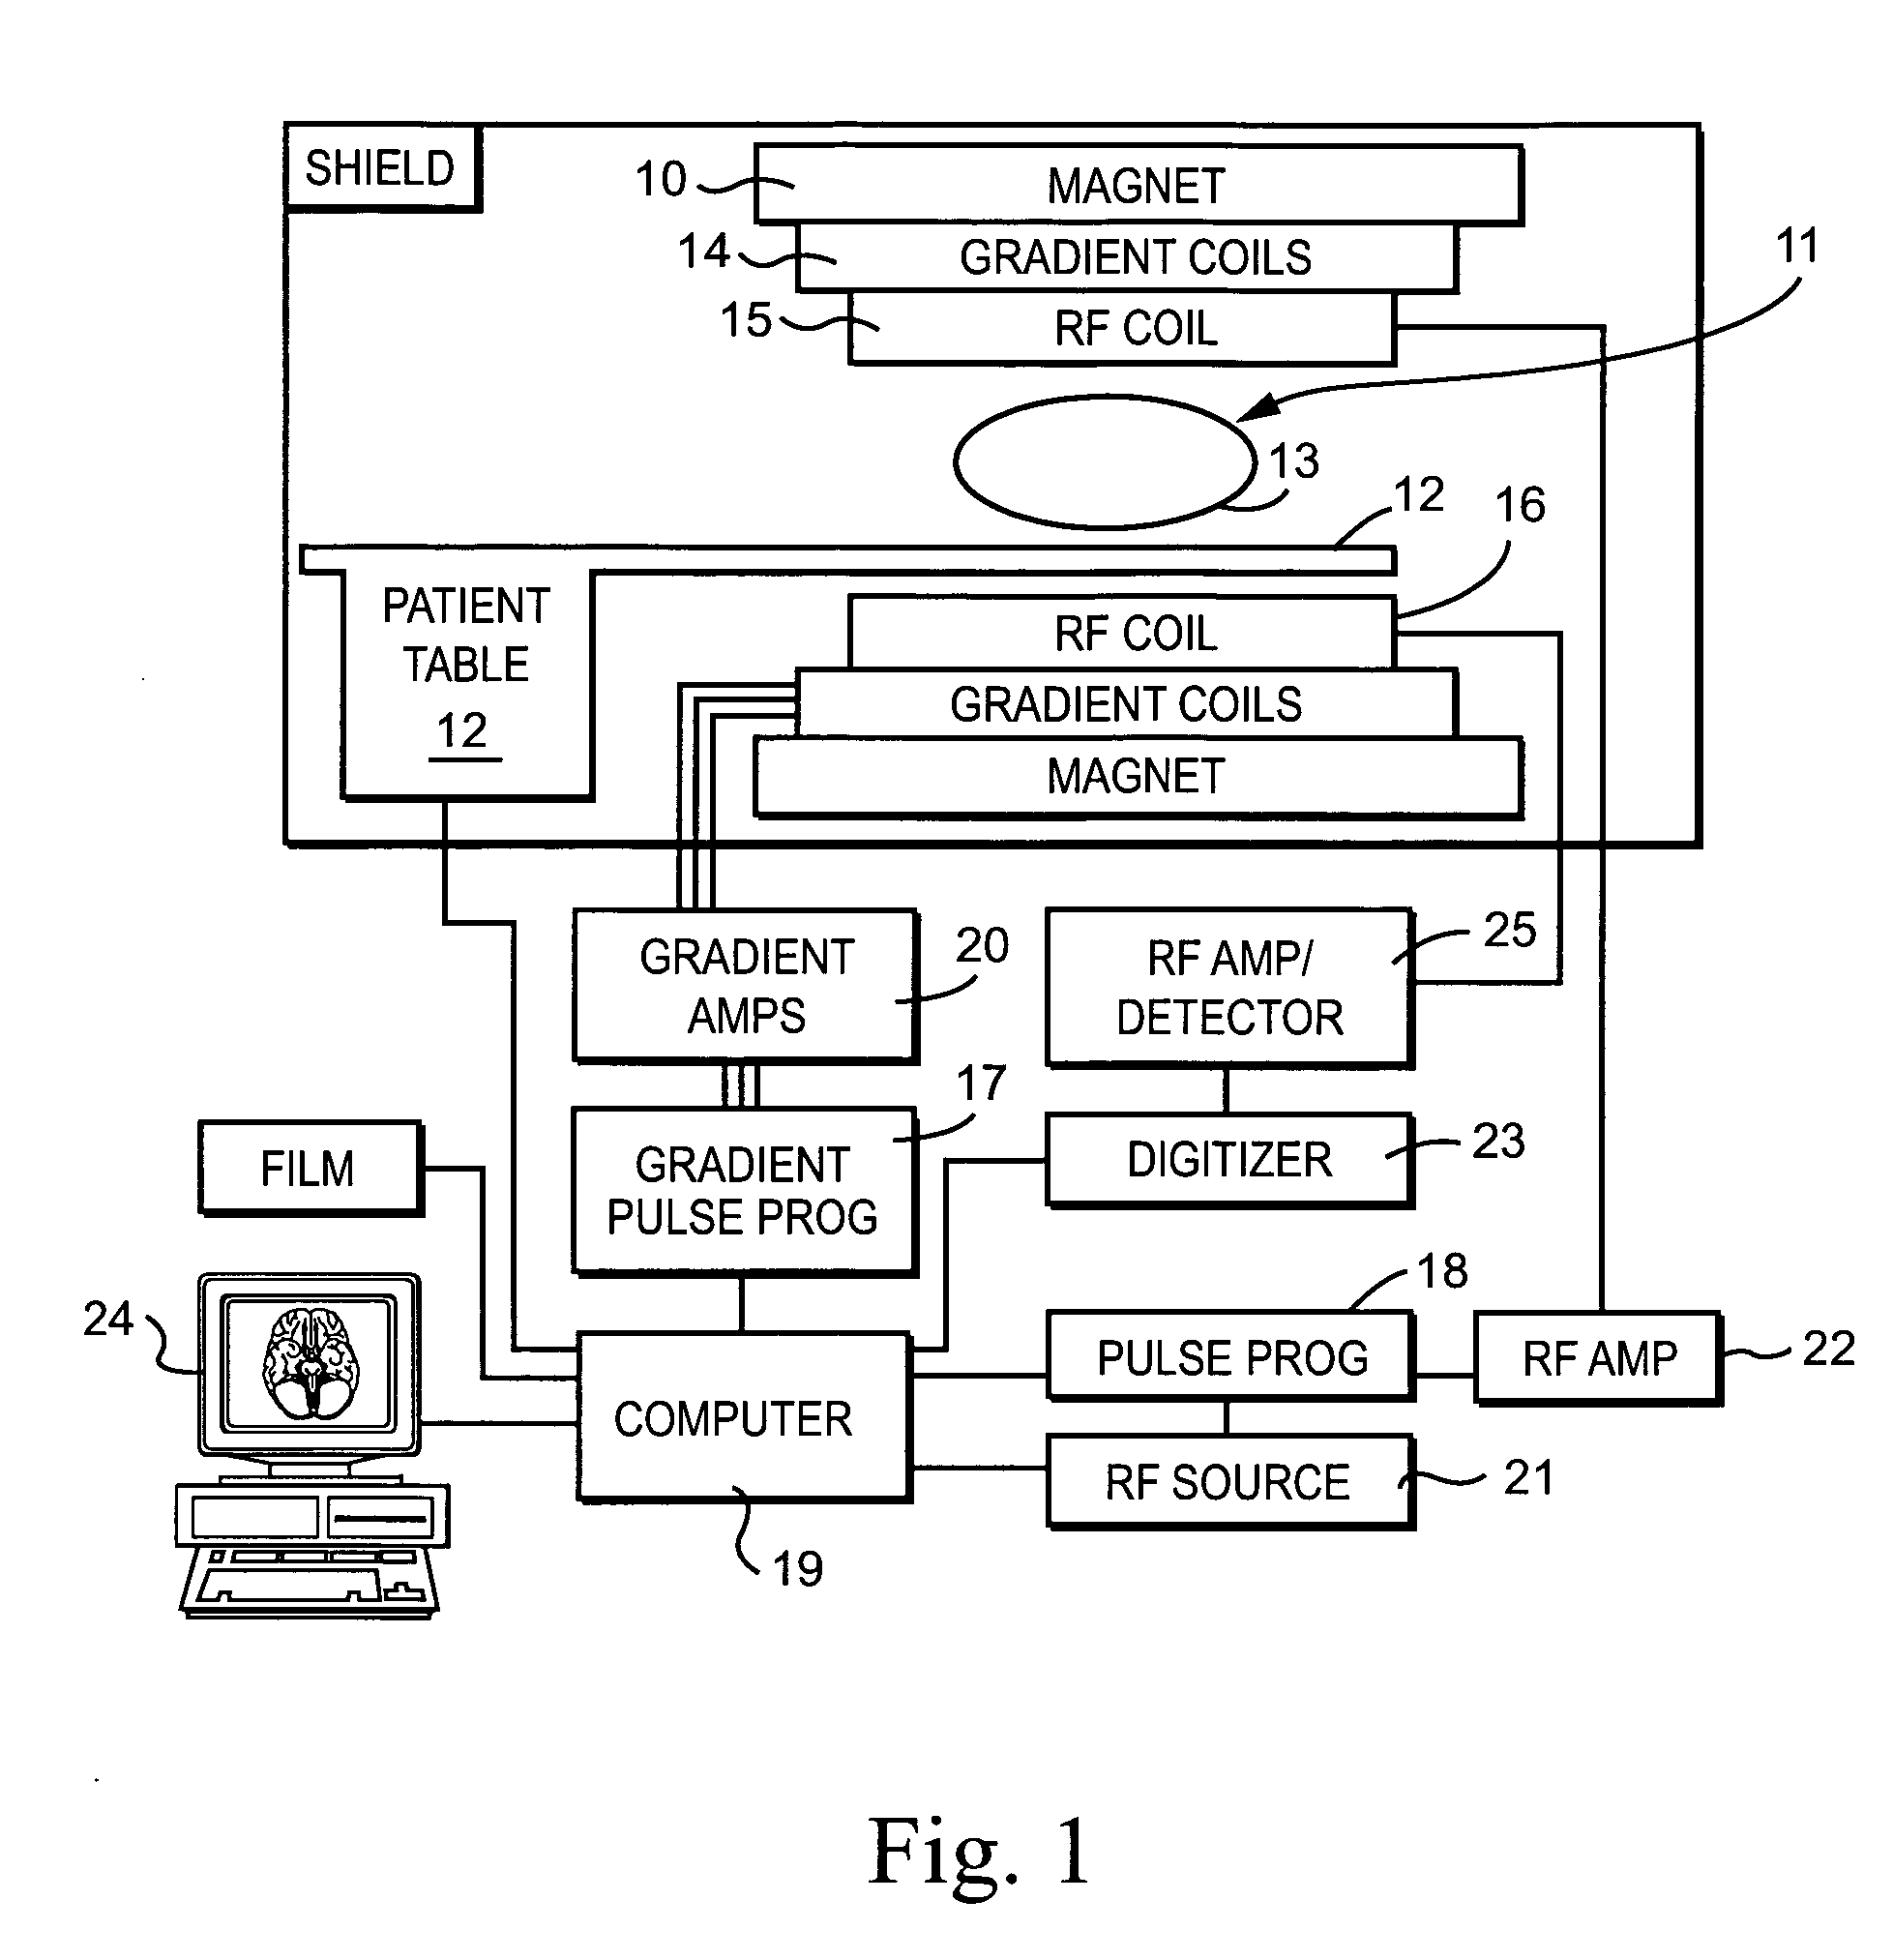 Method and apparatus for diffusion magnetic resonance imaging with the effects of eddy currents compensated